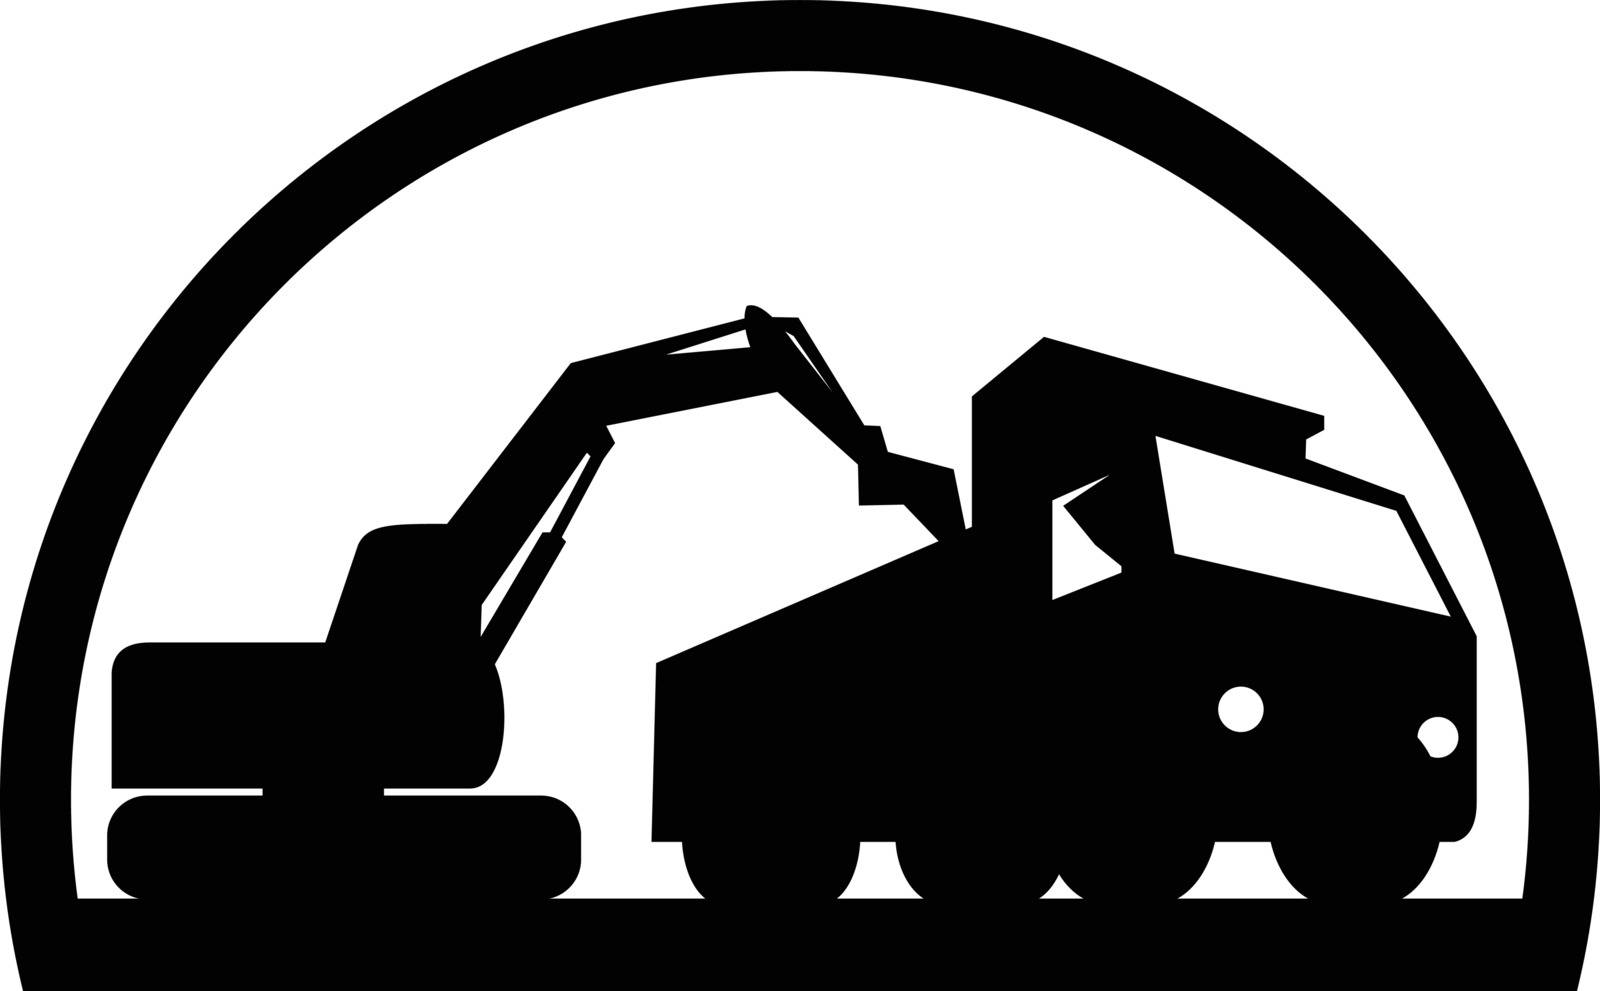 Black and White Illustration of a mechanical digger excavator earthmover loading a dump truck viewed from low angle set inside circle done in retro style, 